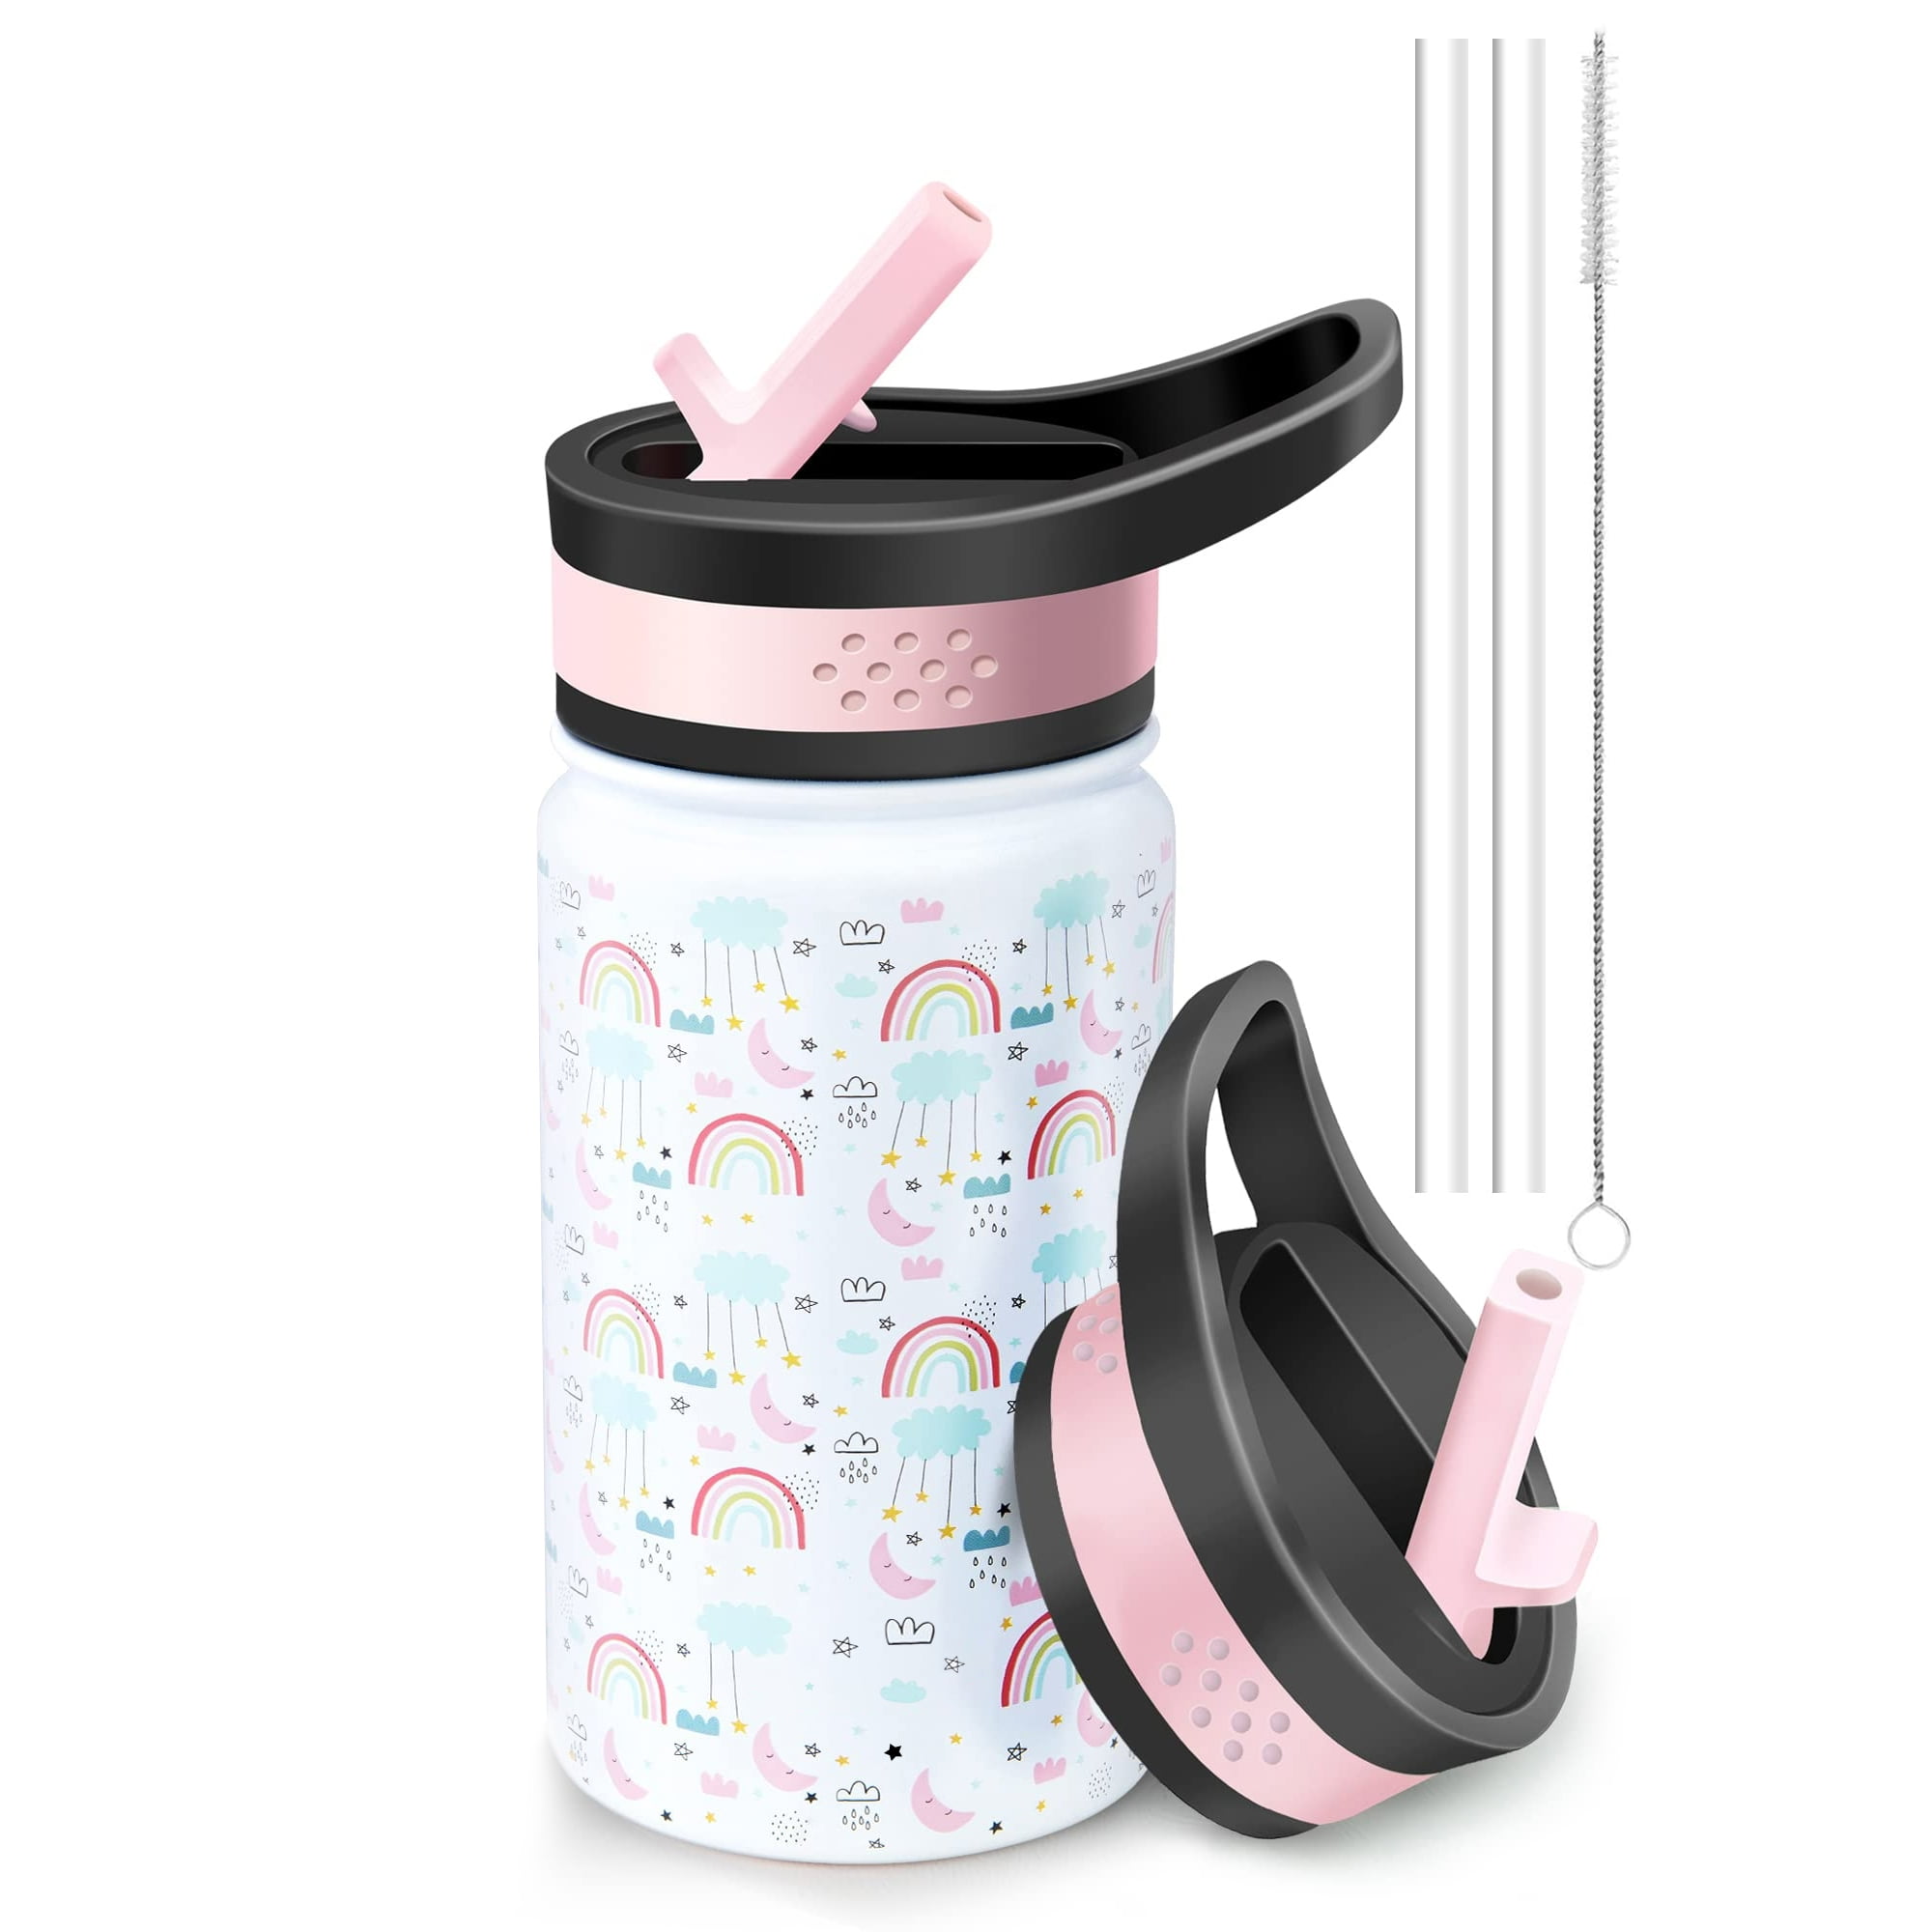 honogo 16 oz Stainless Steel Insulated Kids Water Bottle, Leak Proof Metal  Thermos Flask with Straw lid, Cute Toddler Tumbler Cup for School Girls 